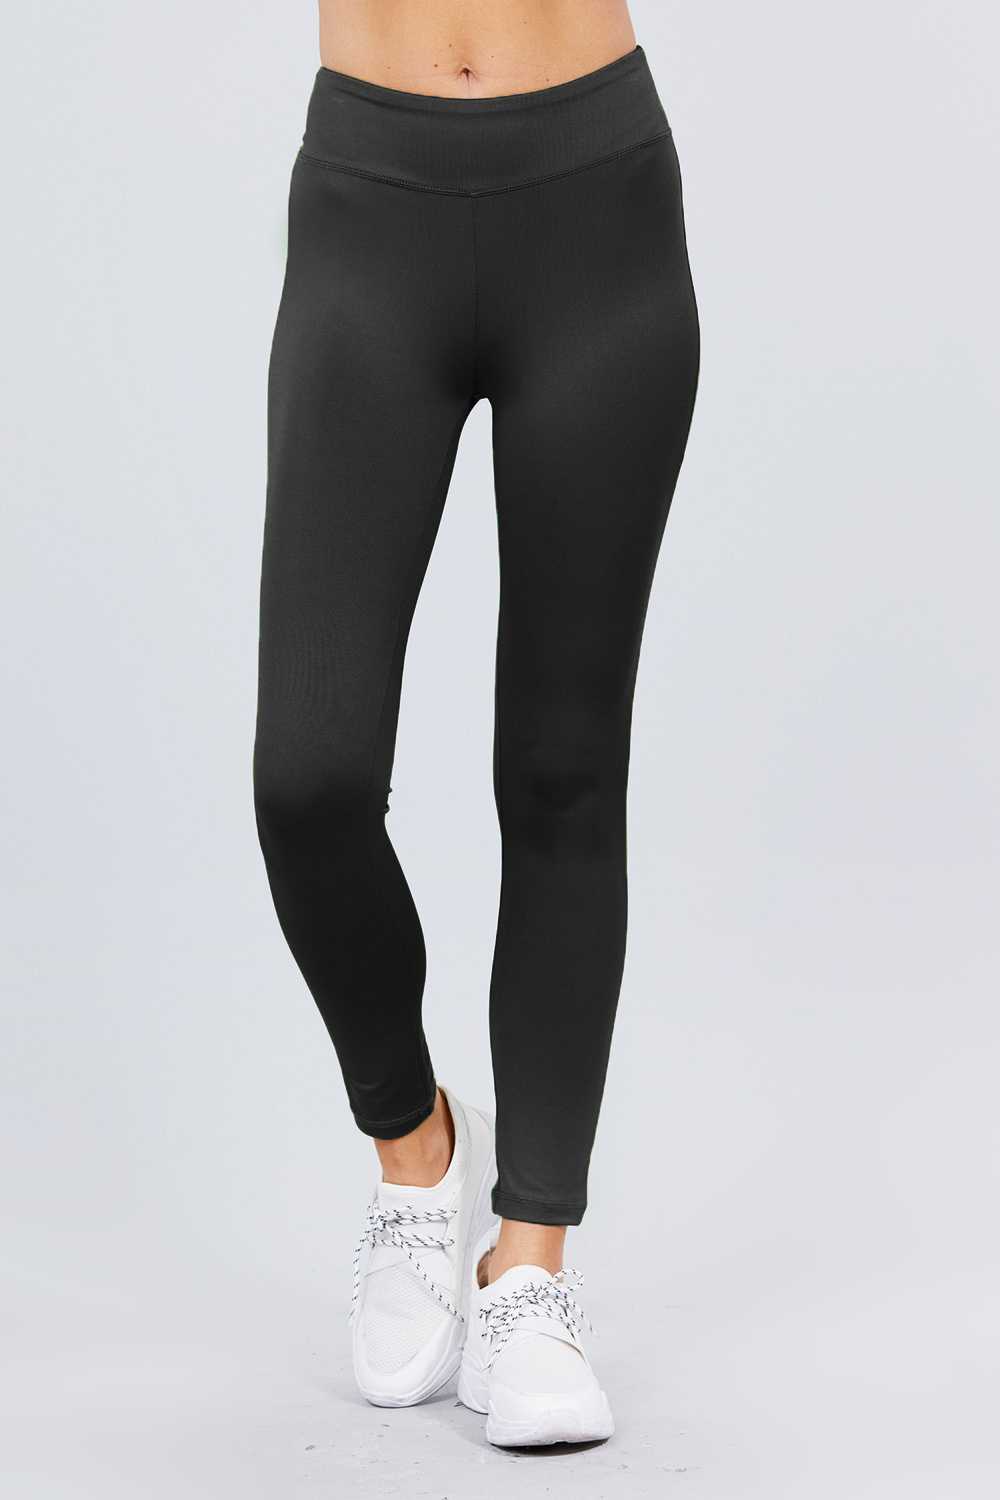 Solid Color 3 Inch High Waisted Track Active Skinny Leggings - Its All ...